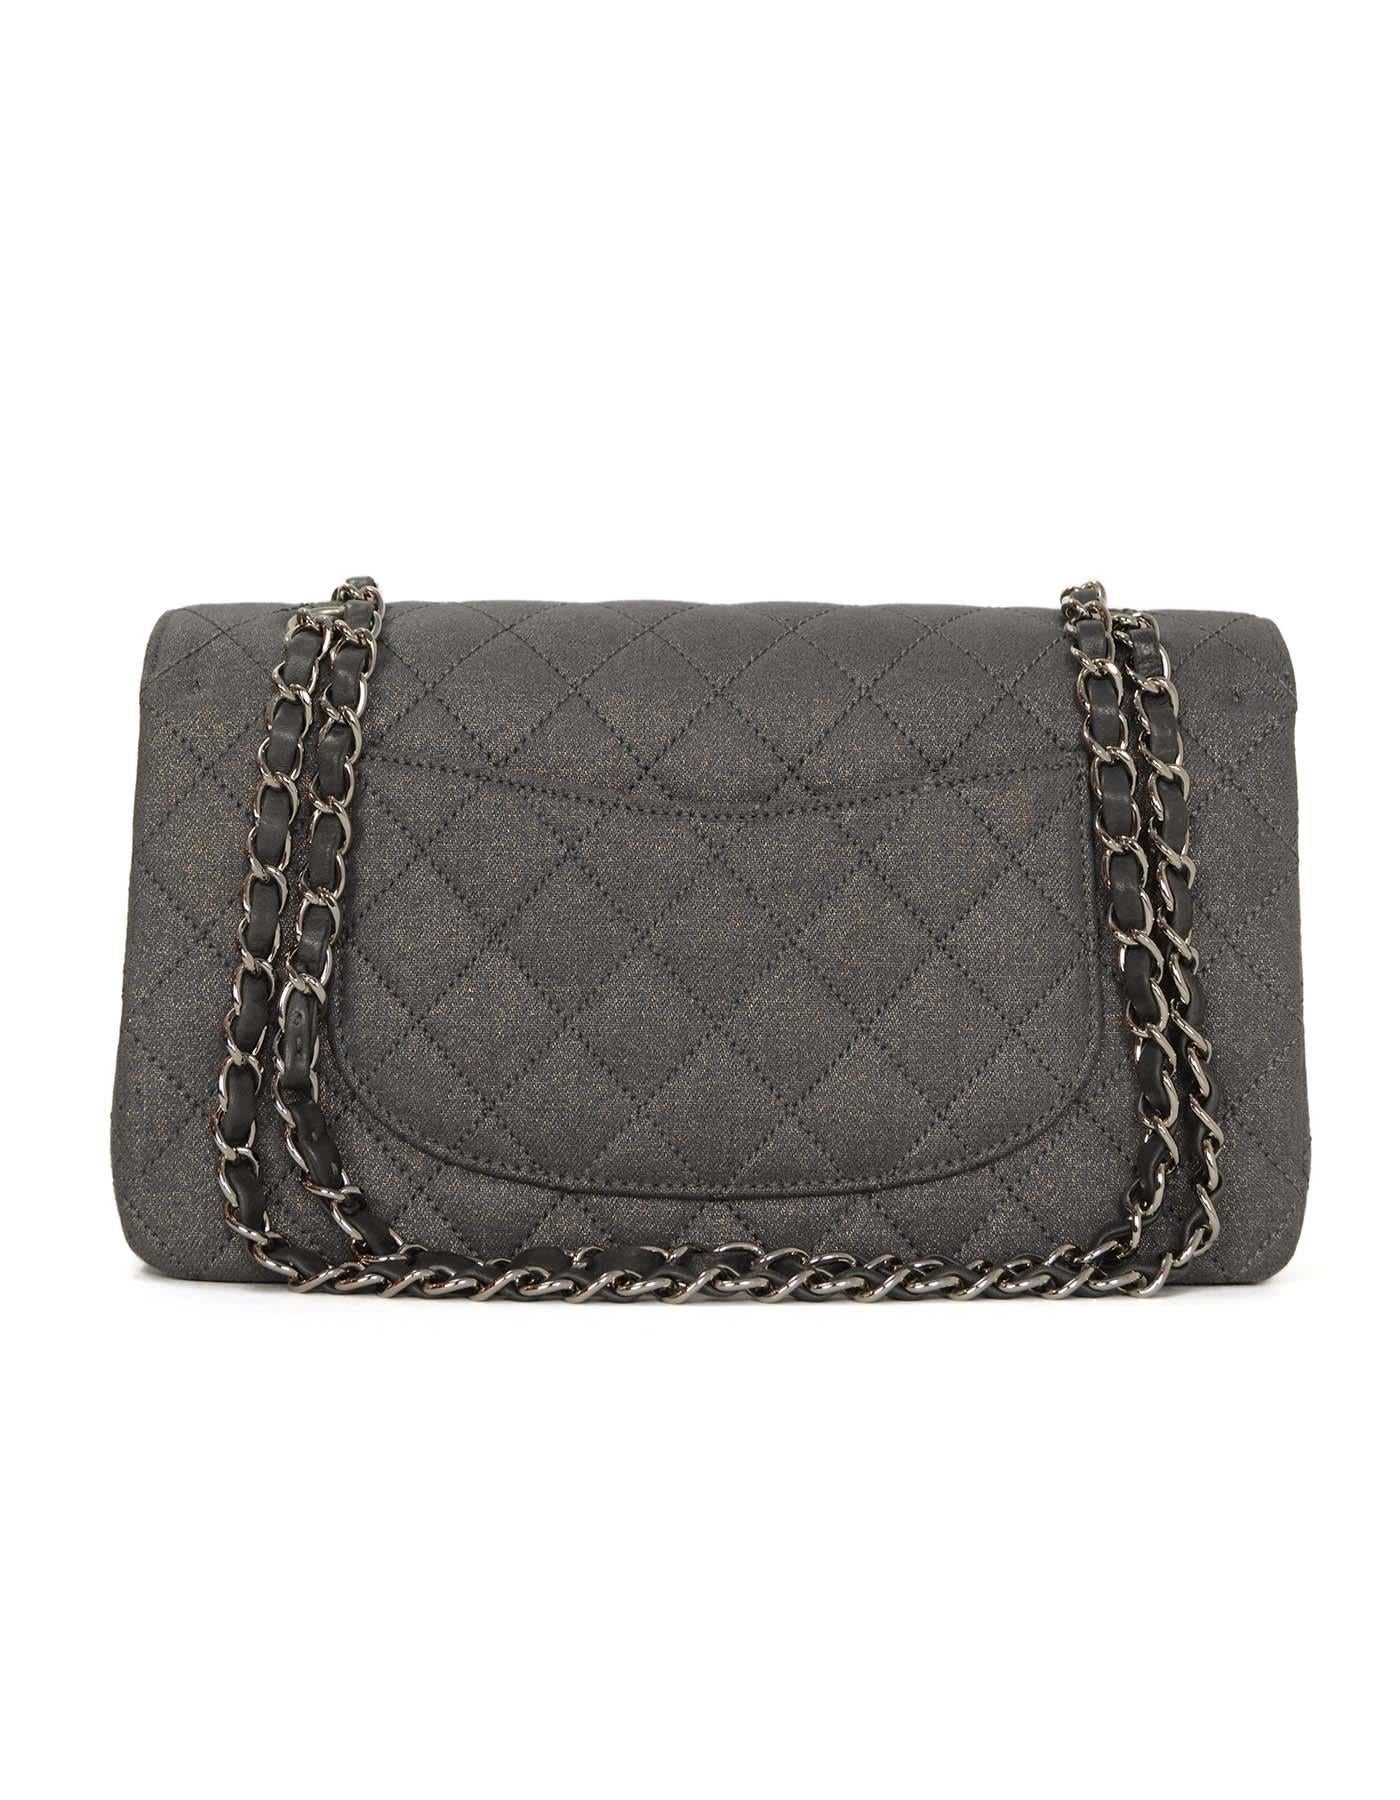 Chanel Metallic Grey Quilted Fabric Medium Classic Double Flap Bag
Features gold metallic threading throughout fabric
Made In: France
Year of Production: 2005-2006
Color: Metallic grey
Hardware: Silvertone
Materials: Fabric
Lining: Grey